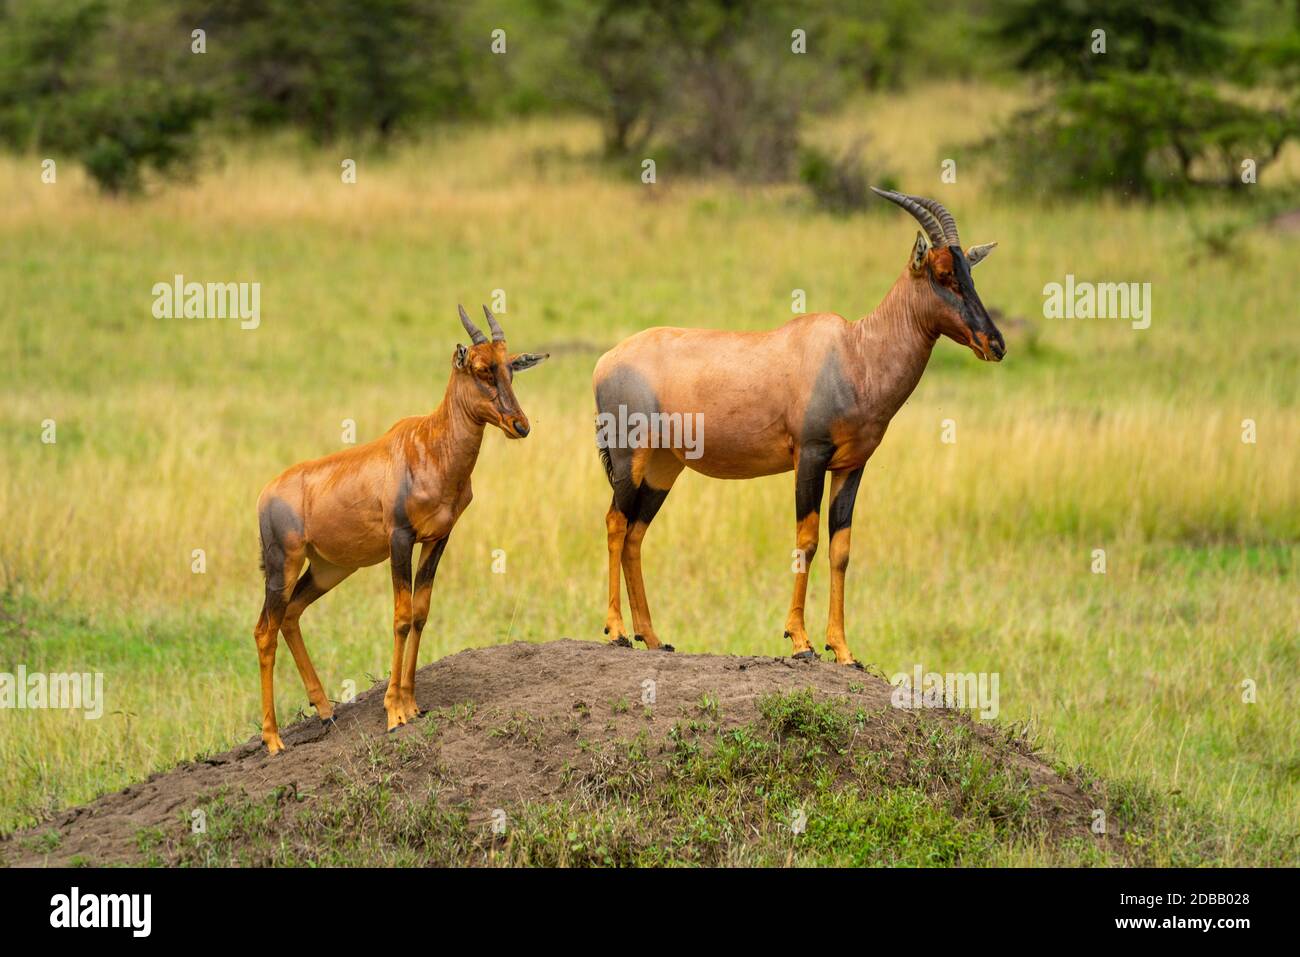 Topi stands on dirt mound with calf Stock Photo